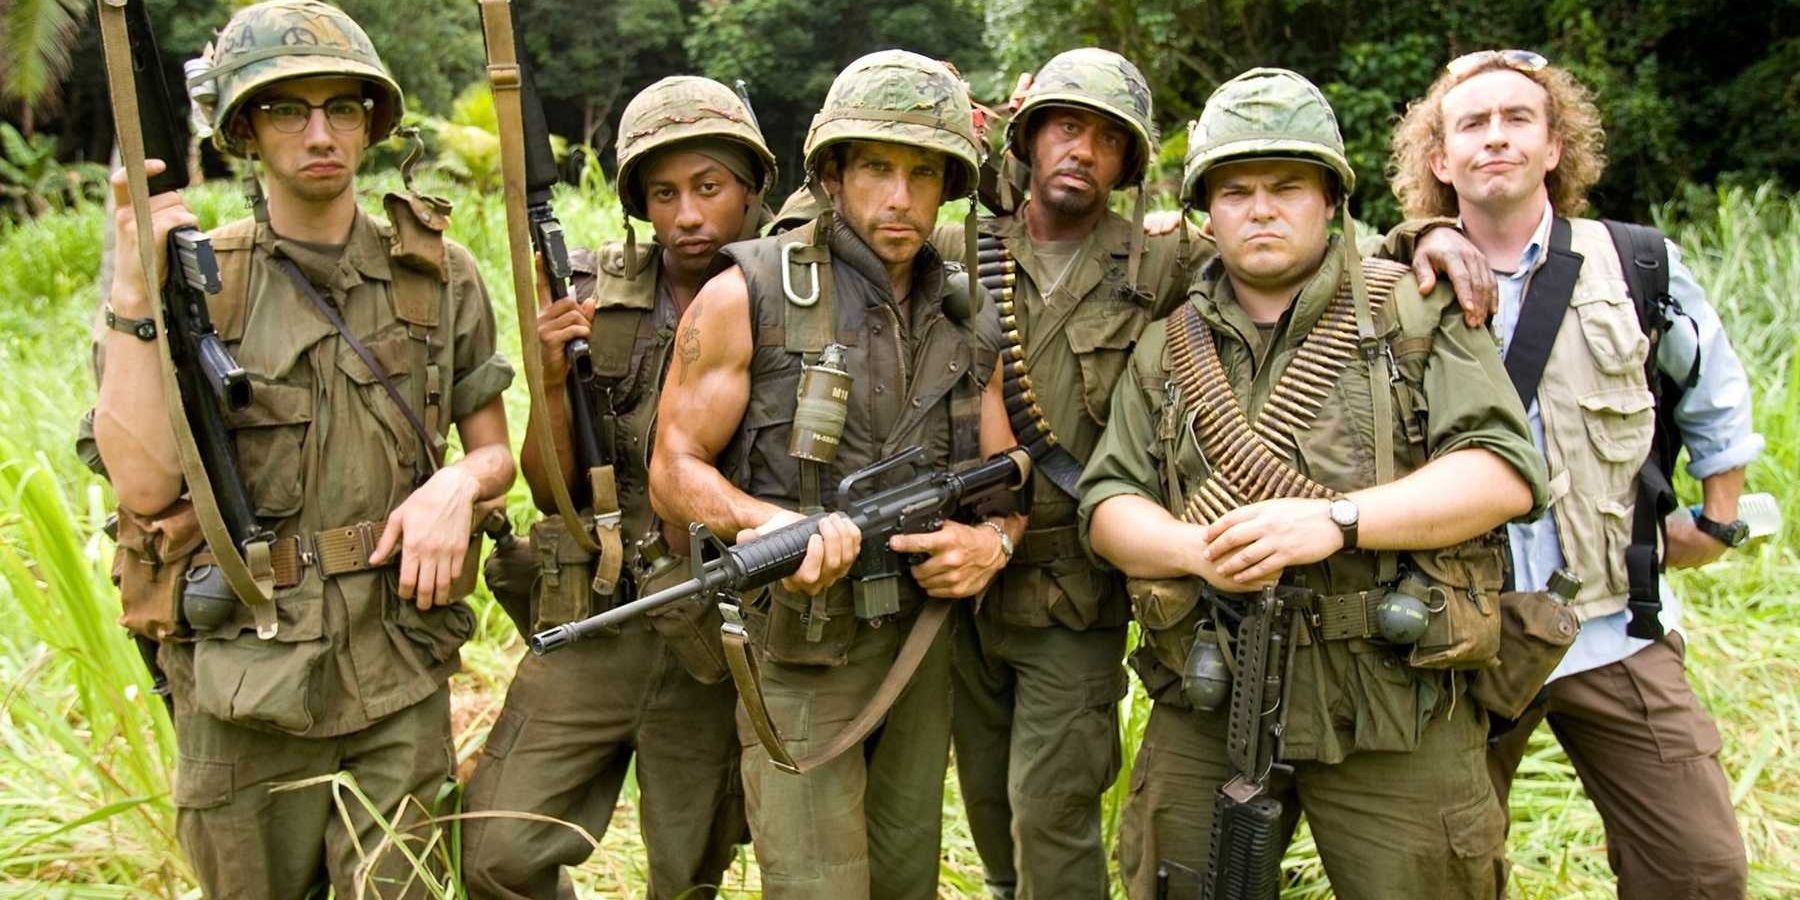 Tropic Thunder cast lined up 